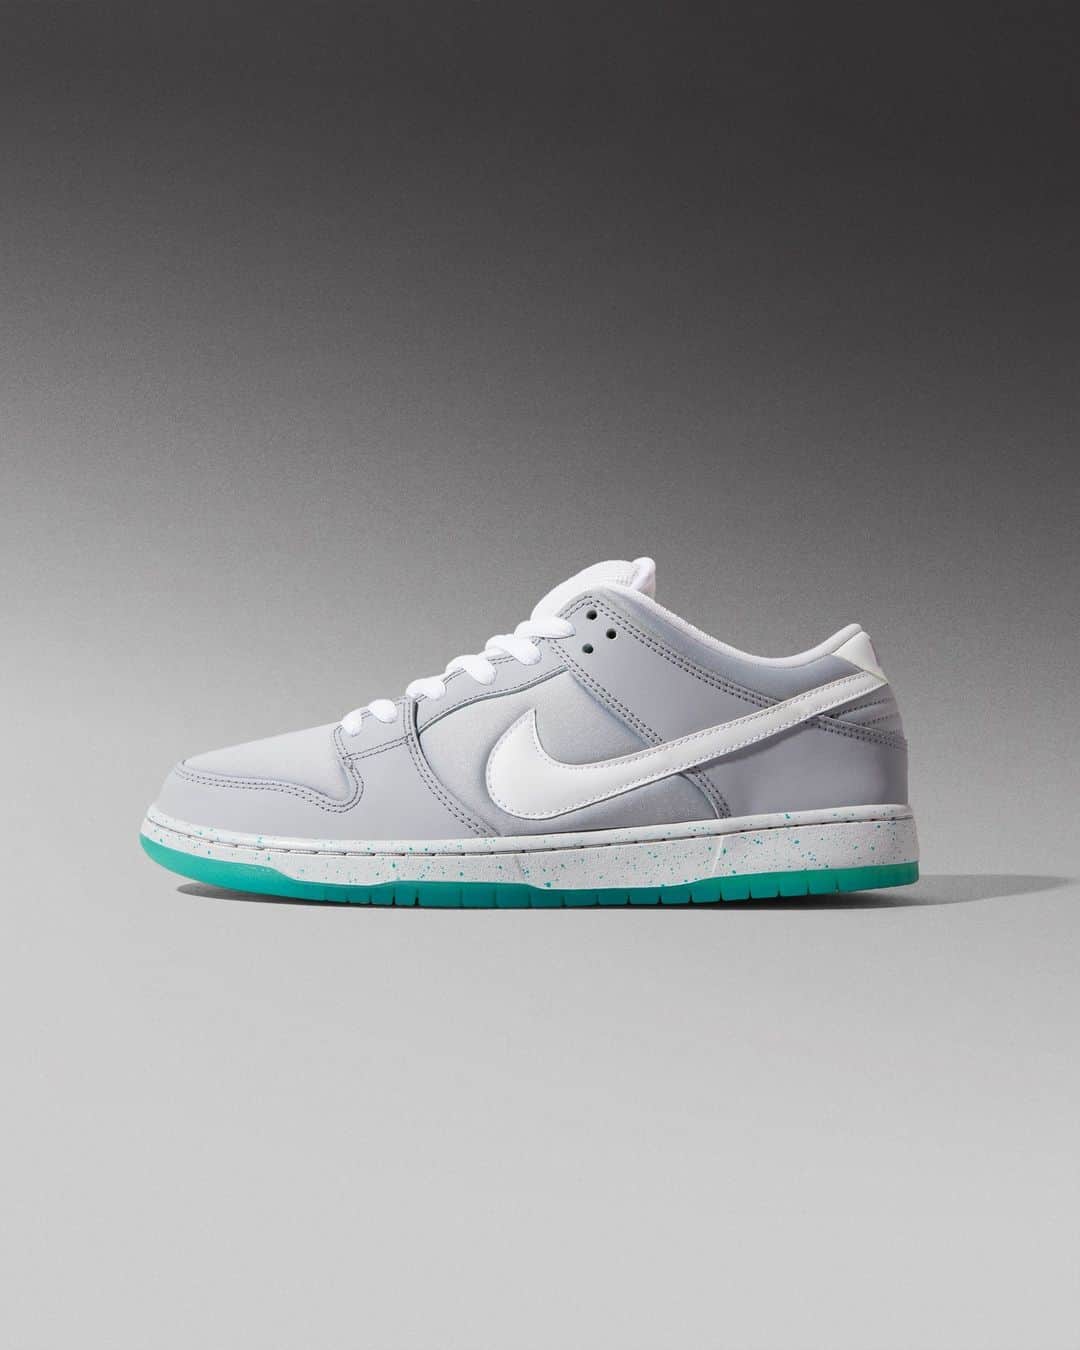 Flight Clubのインスタグラム：「From hoverboards to skateboards, the SB Dunk Low 'Marty McFly' takes after the legendary self-lacing Nike Mags seen in Back to the Future Part II. The 2015 design sports a Wolf Grey upper with a clean white Swoosh and speckled detailing on the midsole. A translucent teal outsole rides underfoot.」